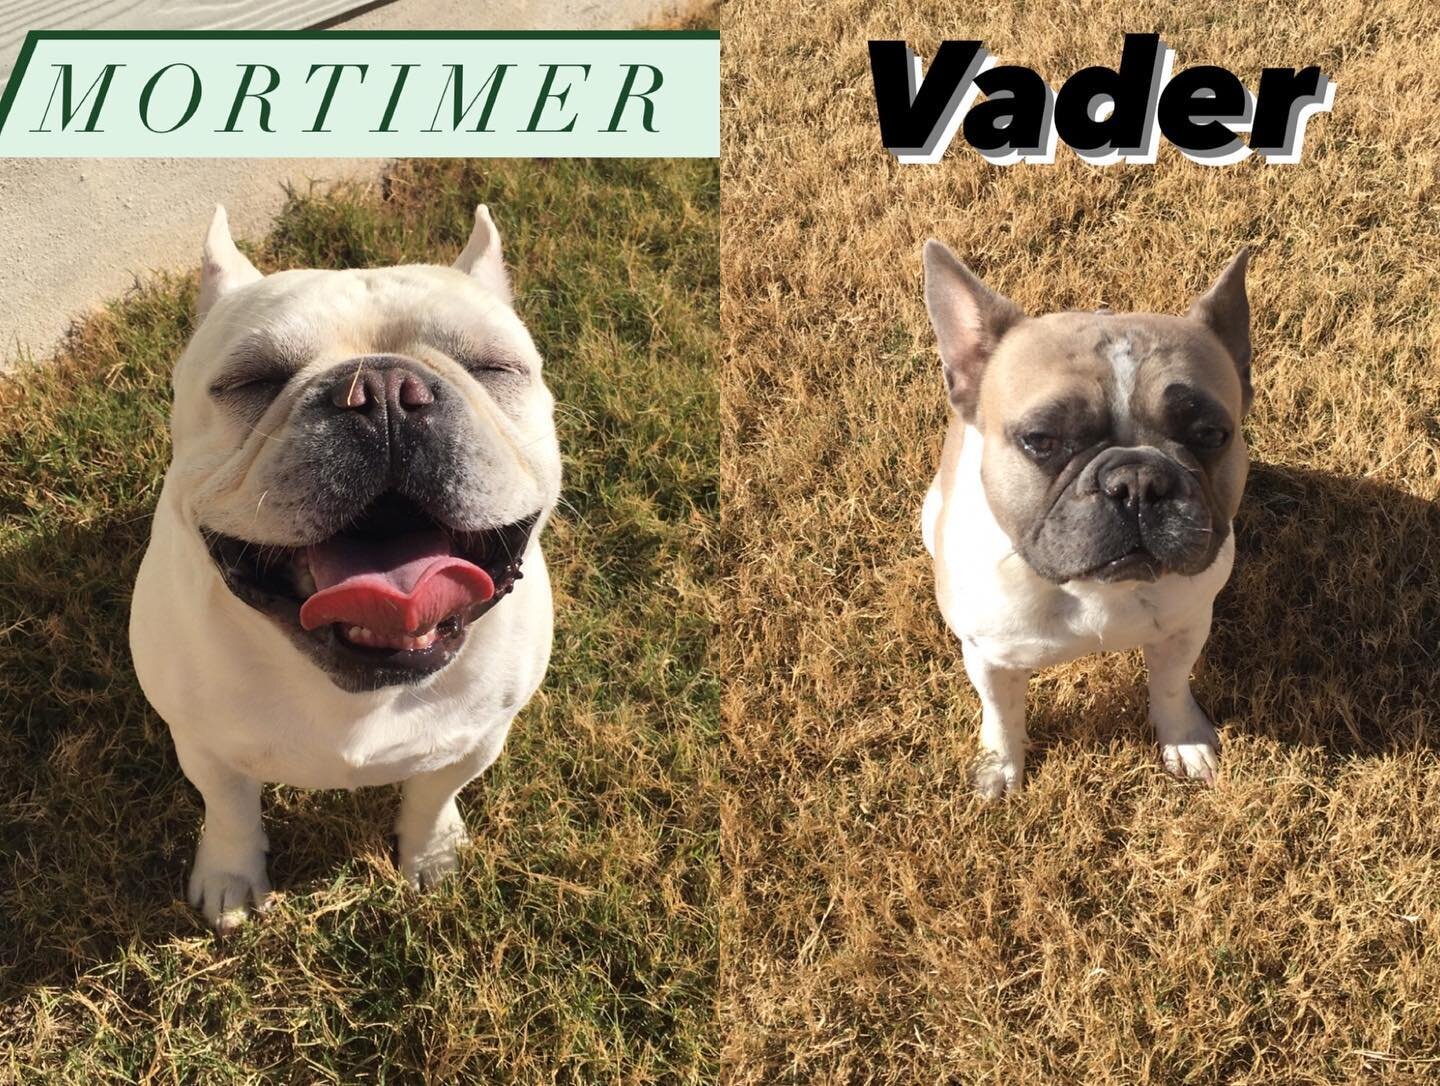 The Frenchy boys Mortimer and Vader showed up this morning for their week stay with us and Cheyenne. The more the merrier!!